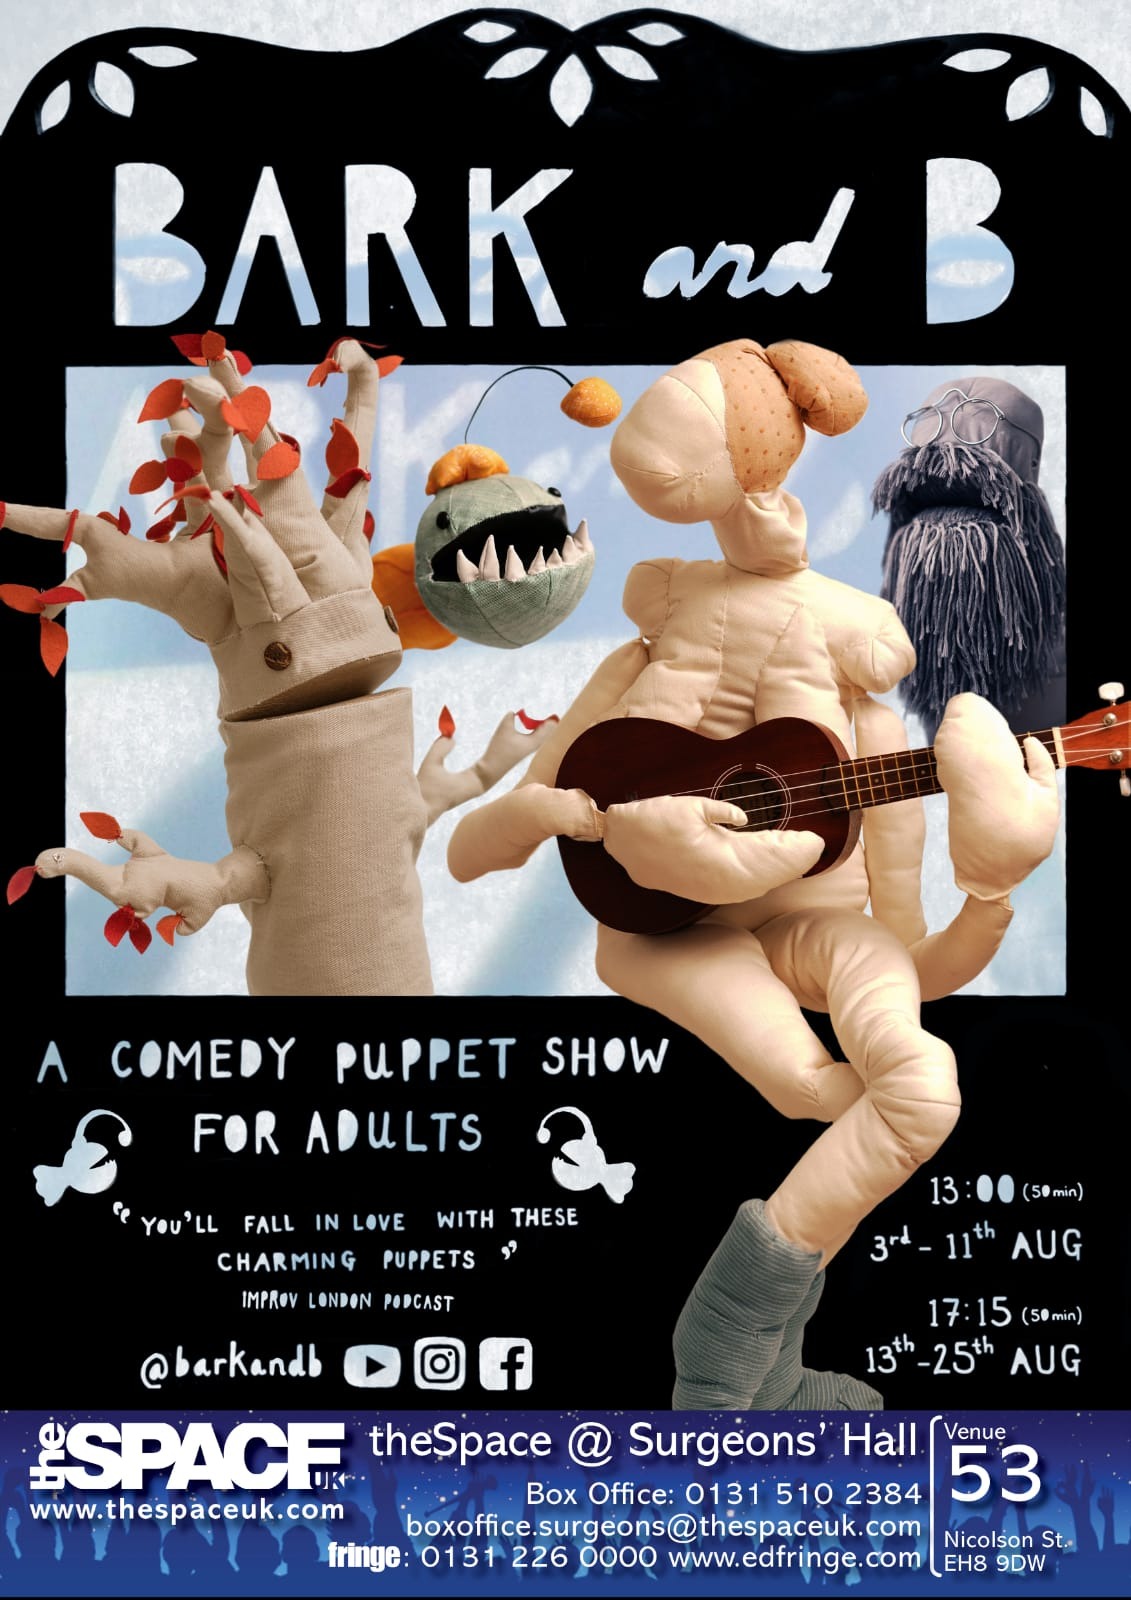 The poster for Bark and B